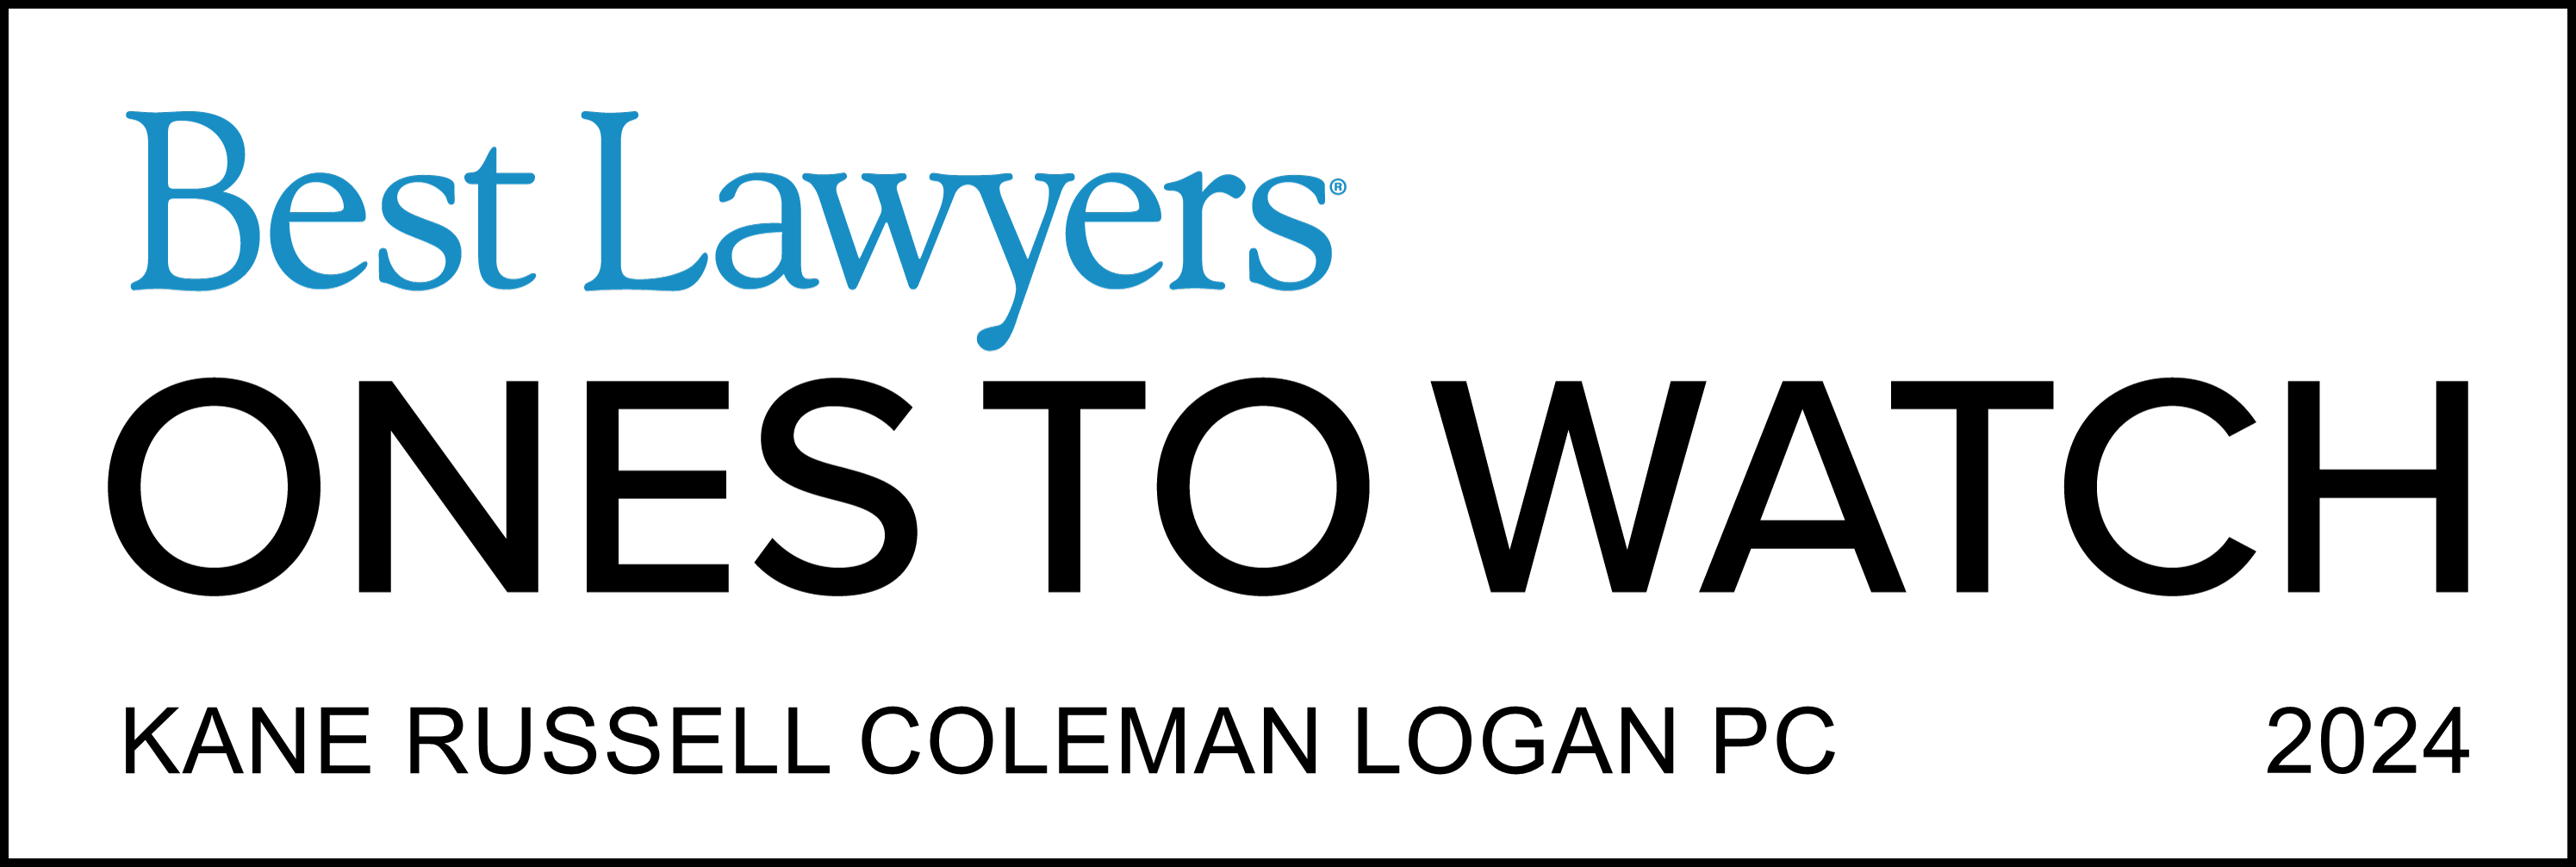 Kane Russell Coleman Logan PC
2024
Recognized by Best Lawyers